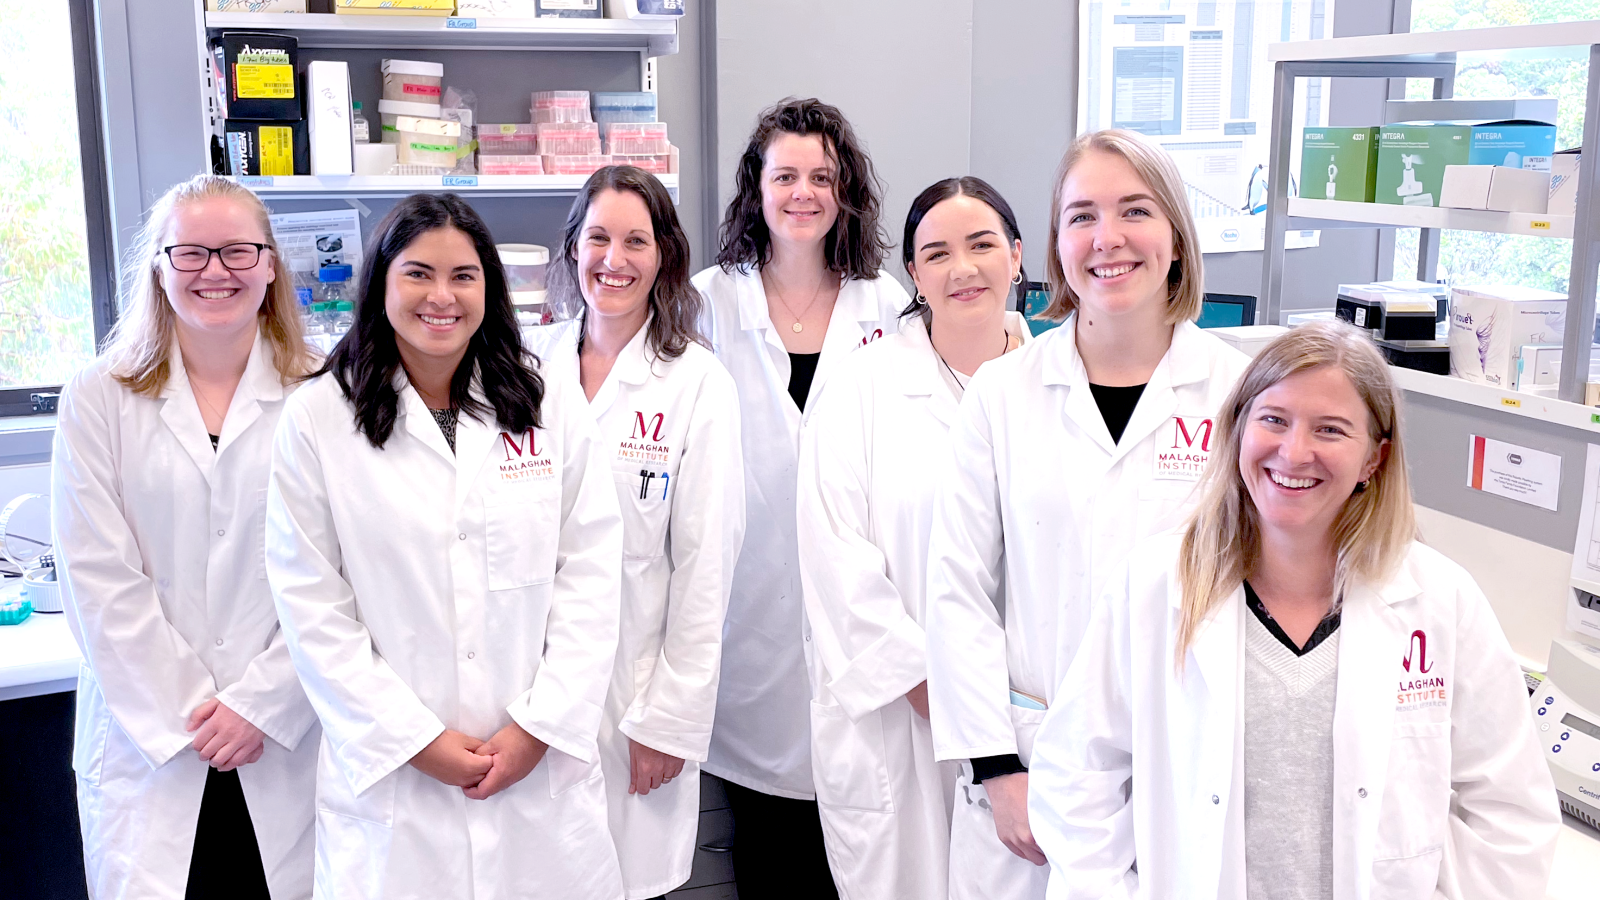 A group of women wearing labcoats stand smiling at the camera.